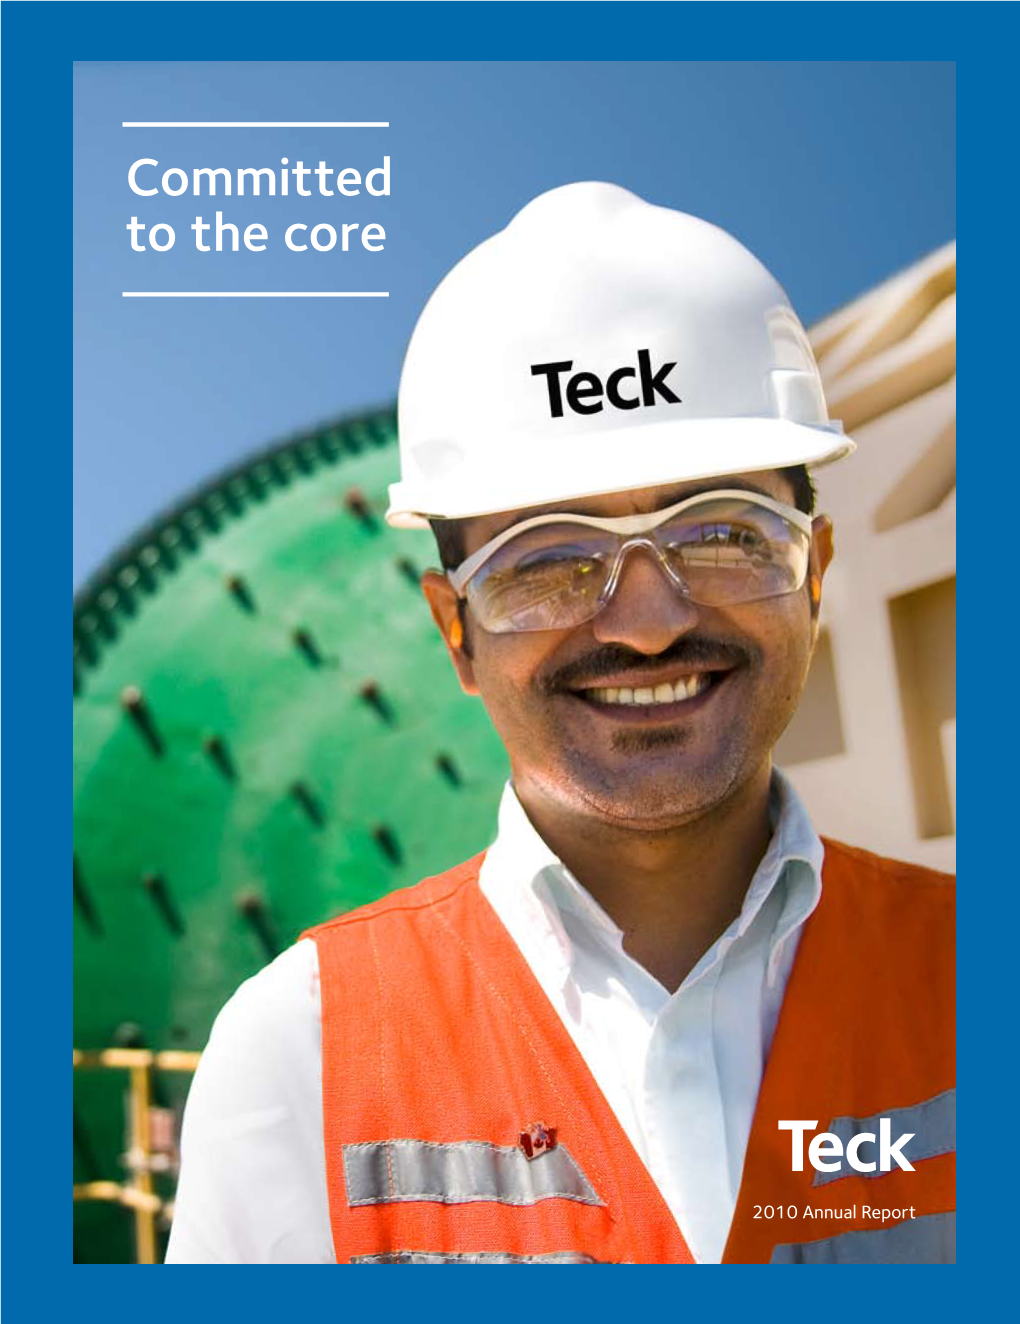 Teck 2010 Annual Report the Operating and Financial Data Found in This Annual Report Reflect the Collective Effort of Nearly 12,000 Teck Employees Around the World